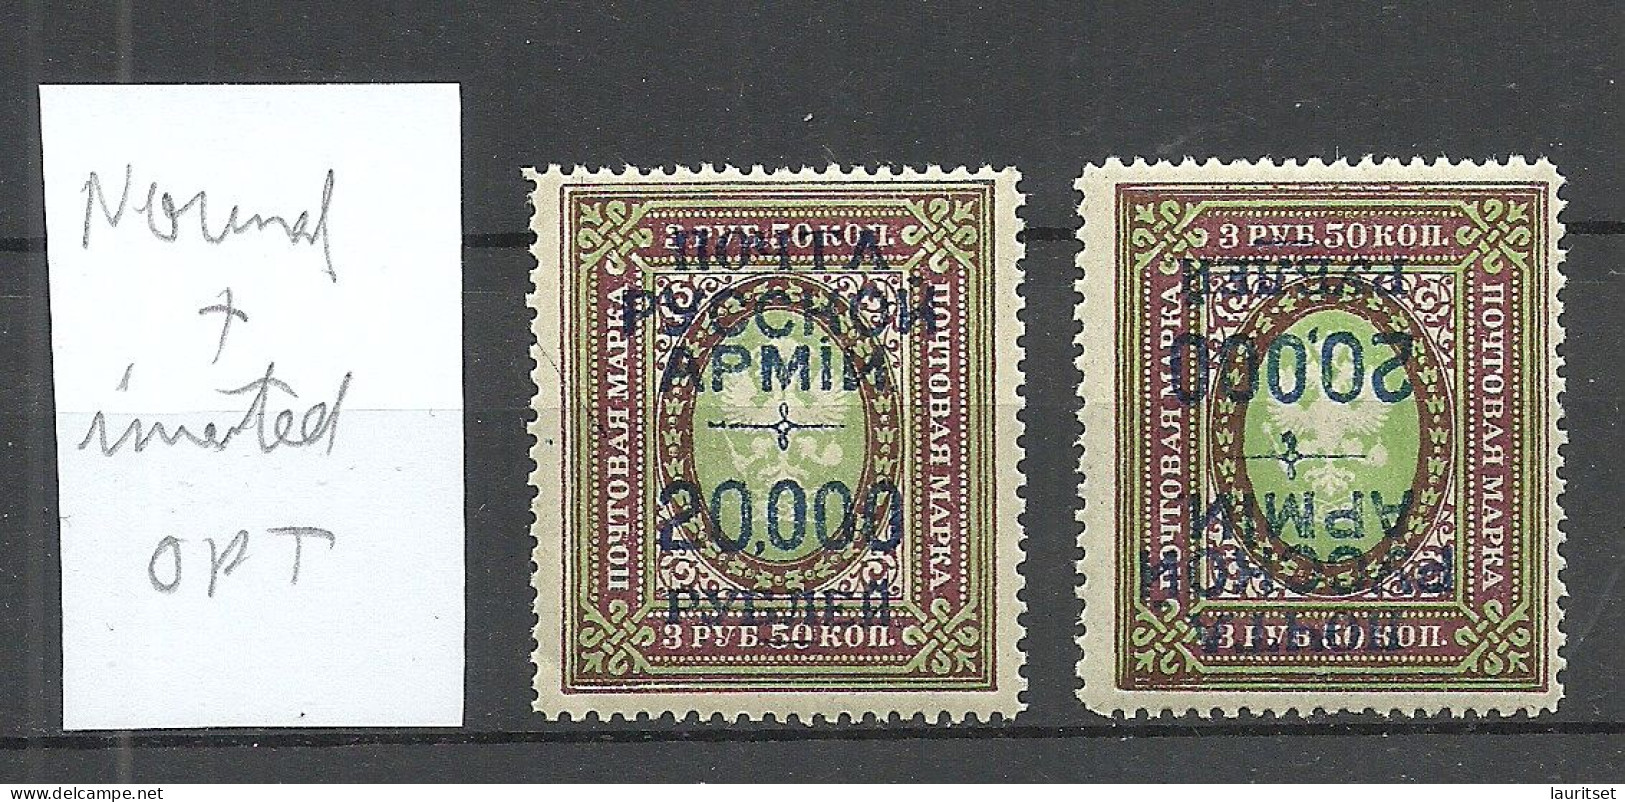 Russia RUSSLAND 1920 Civil War Wrangel Army Camp Post At Gallipoli 20 000 On 3,50 R. Perforated, Normal + INVERTED OPT * - Armée Wrangel